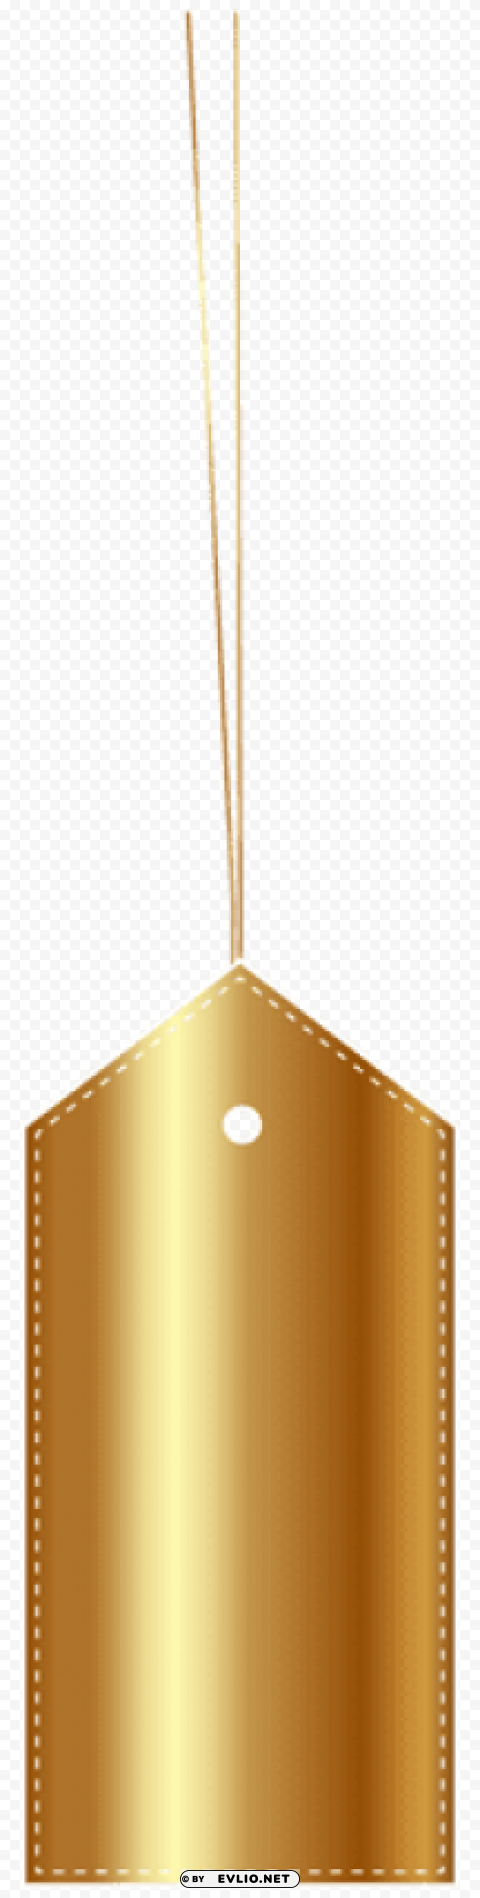 gold template label transparent HighQuality PNG Isolated Illustration